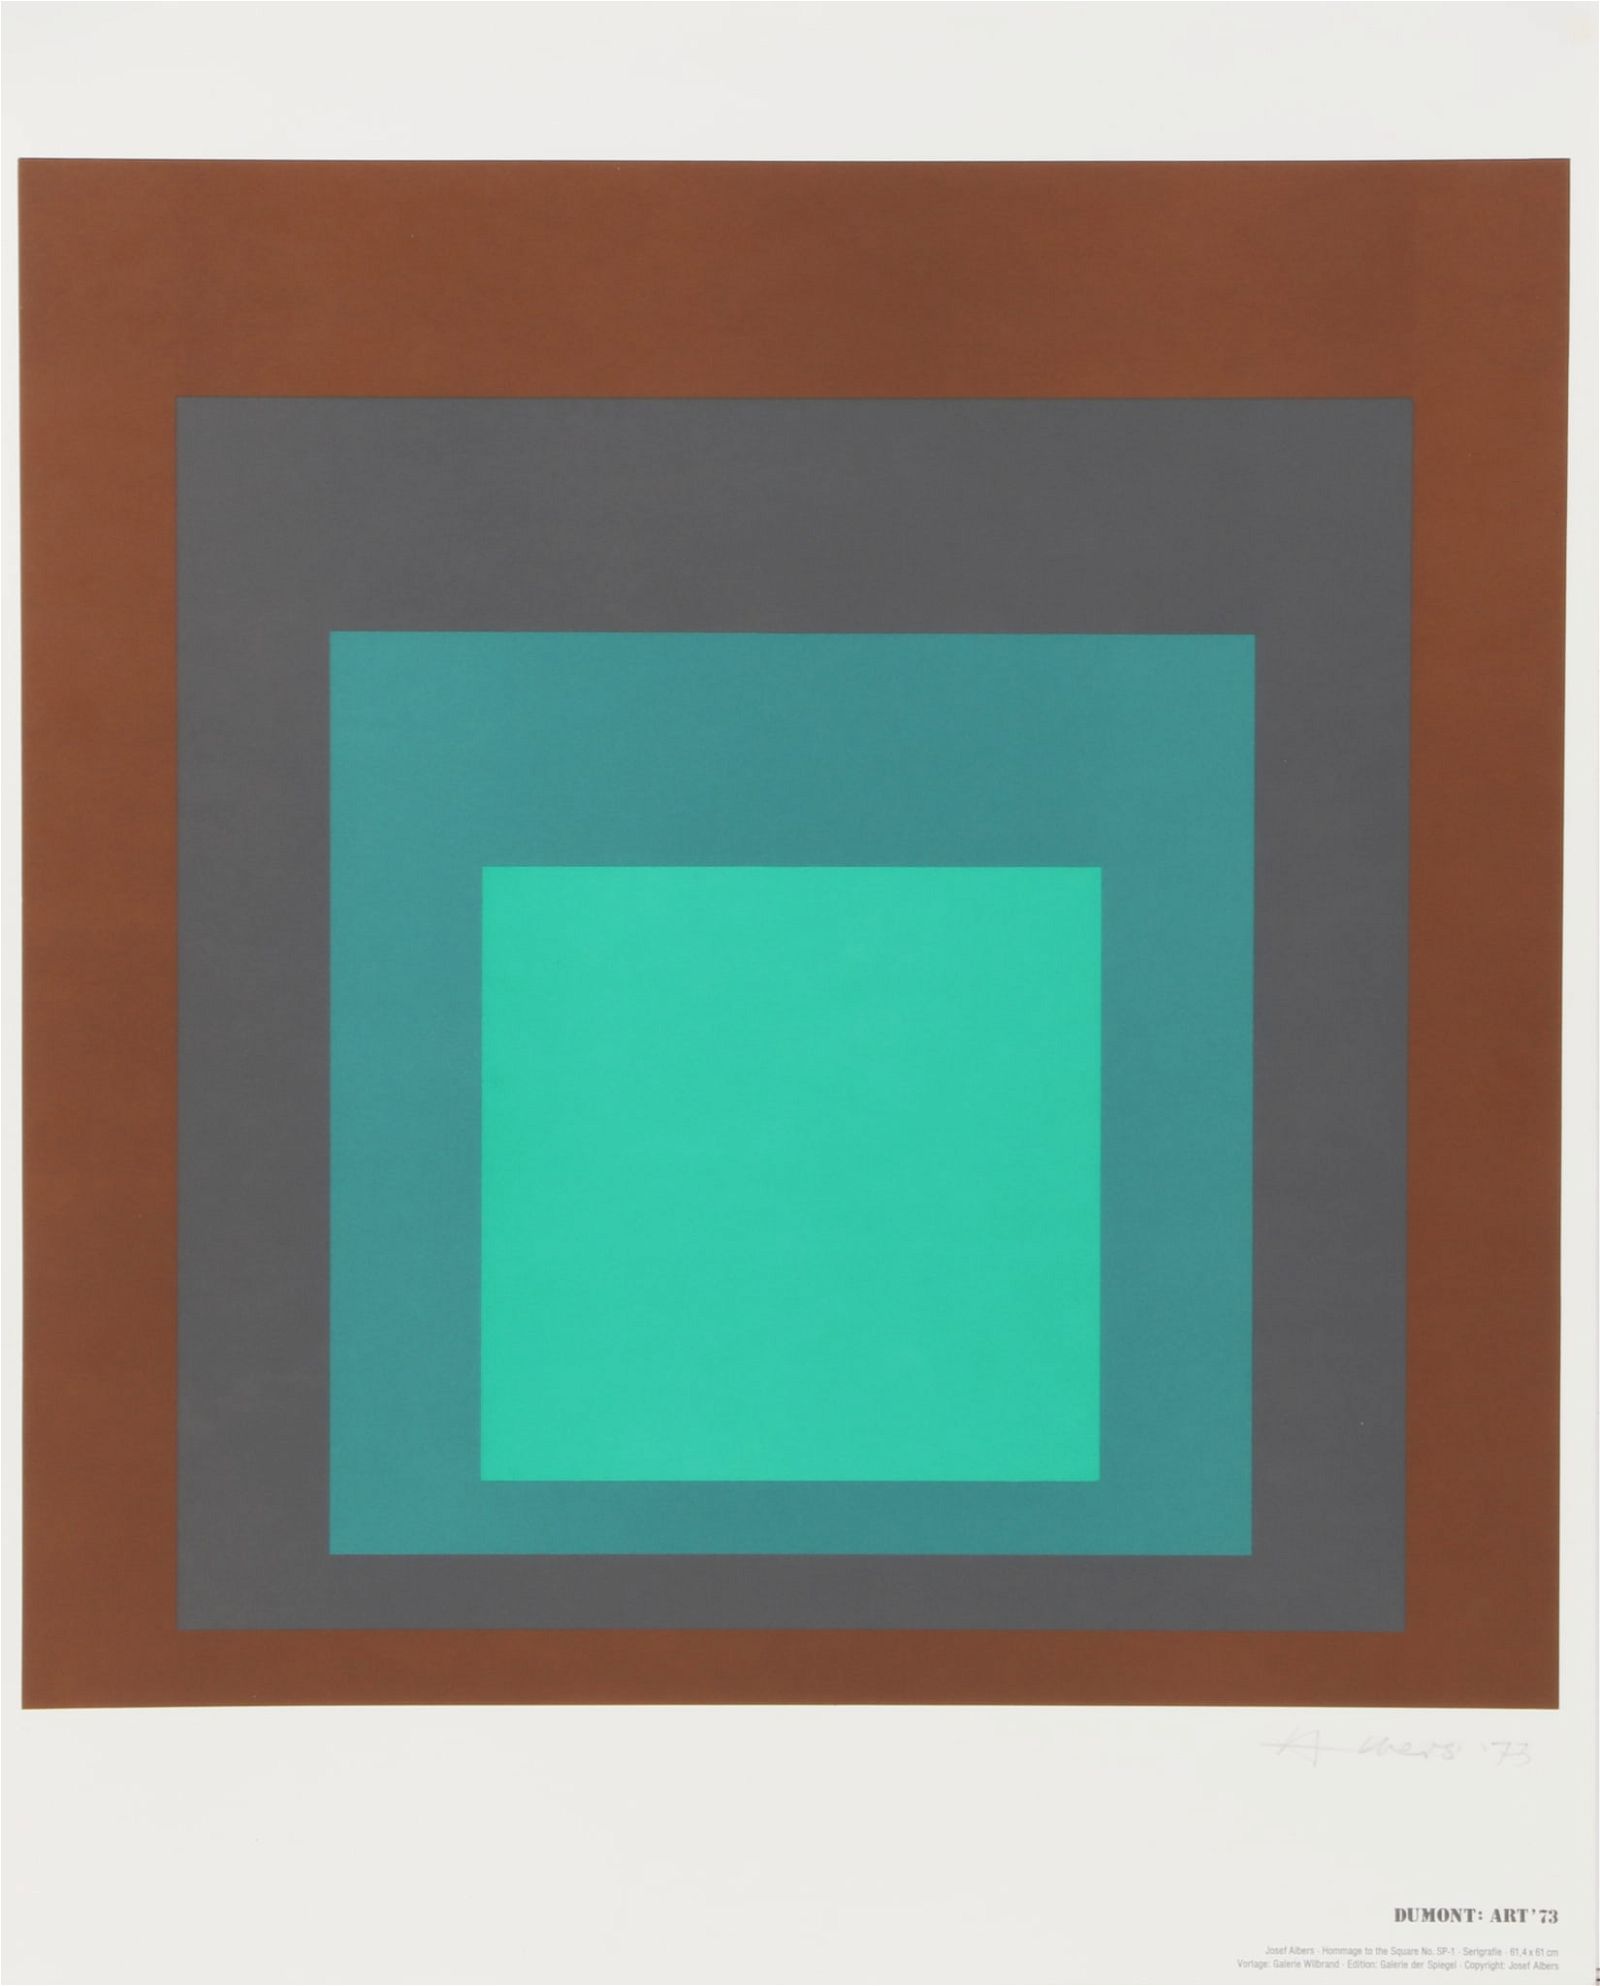 JOSEPH ALBERS HOMAGE TO THE SQUARE 2fb2a9f